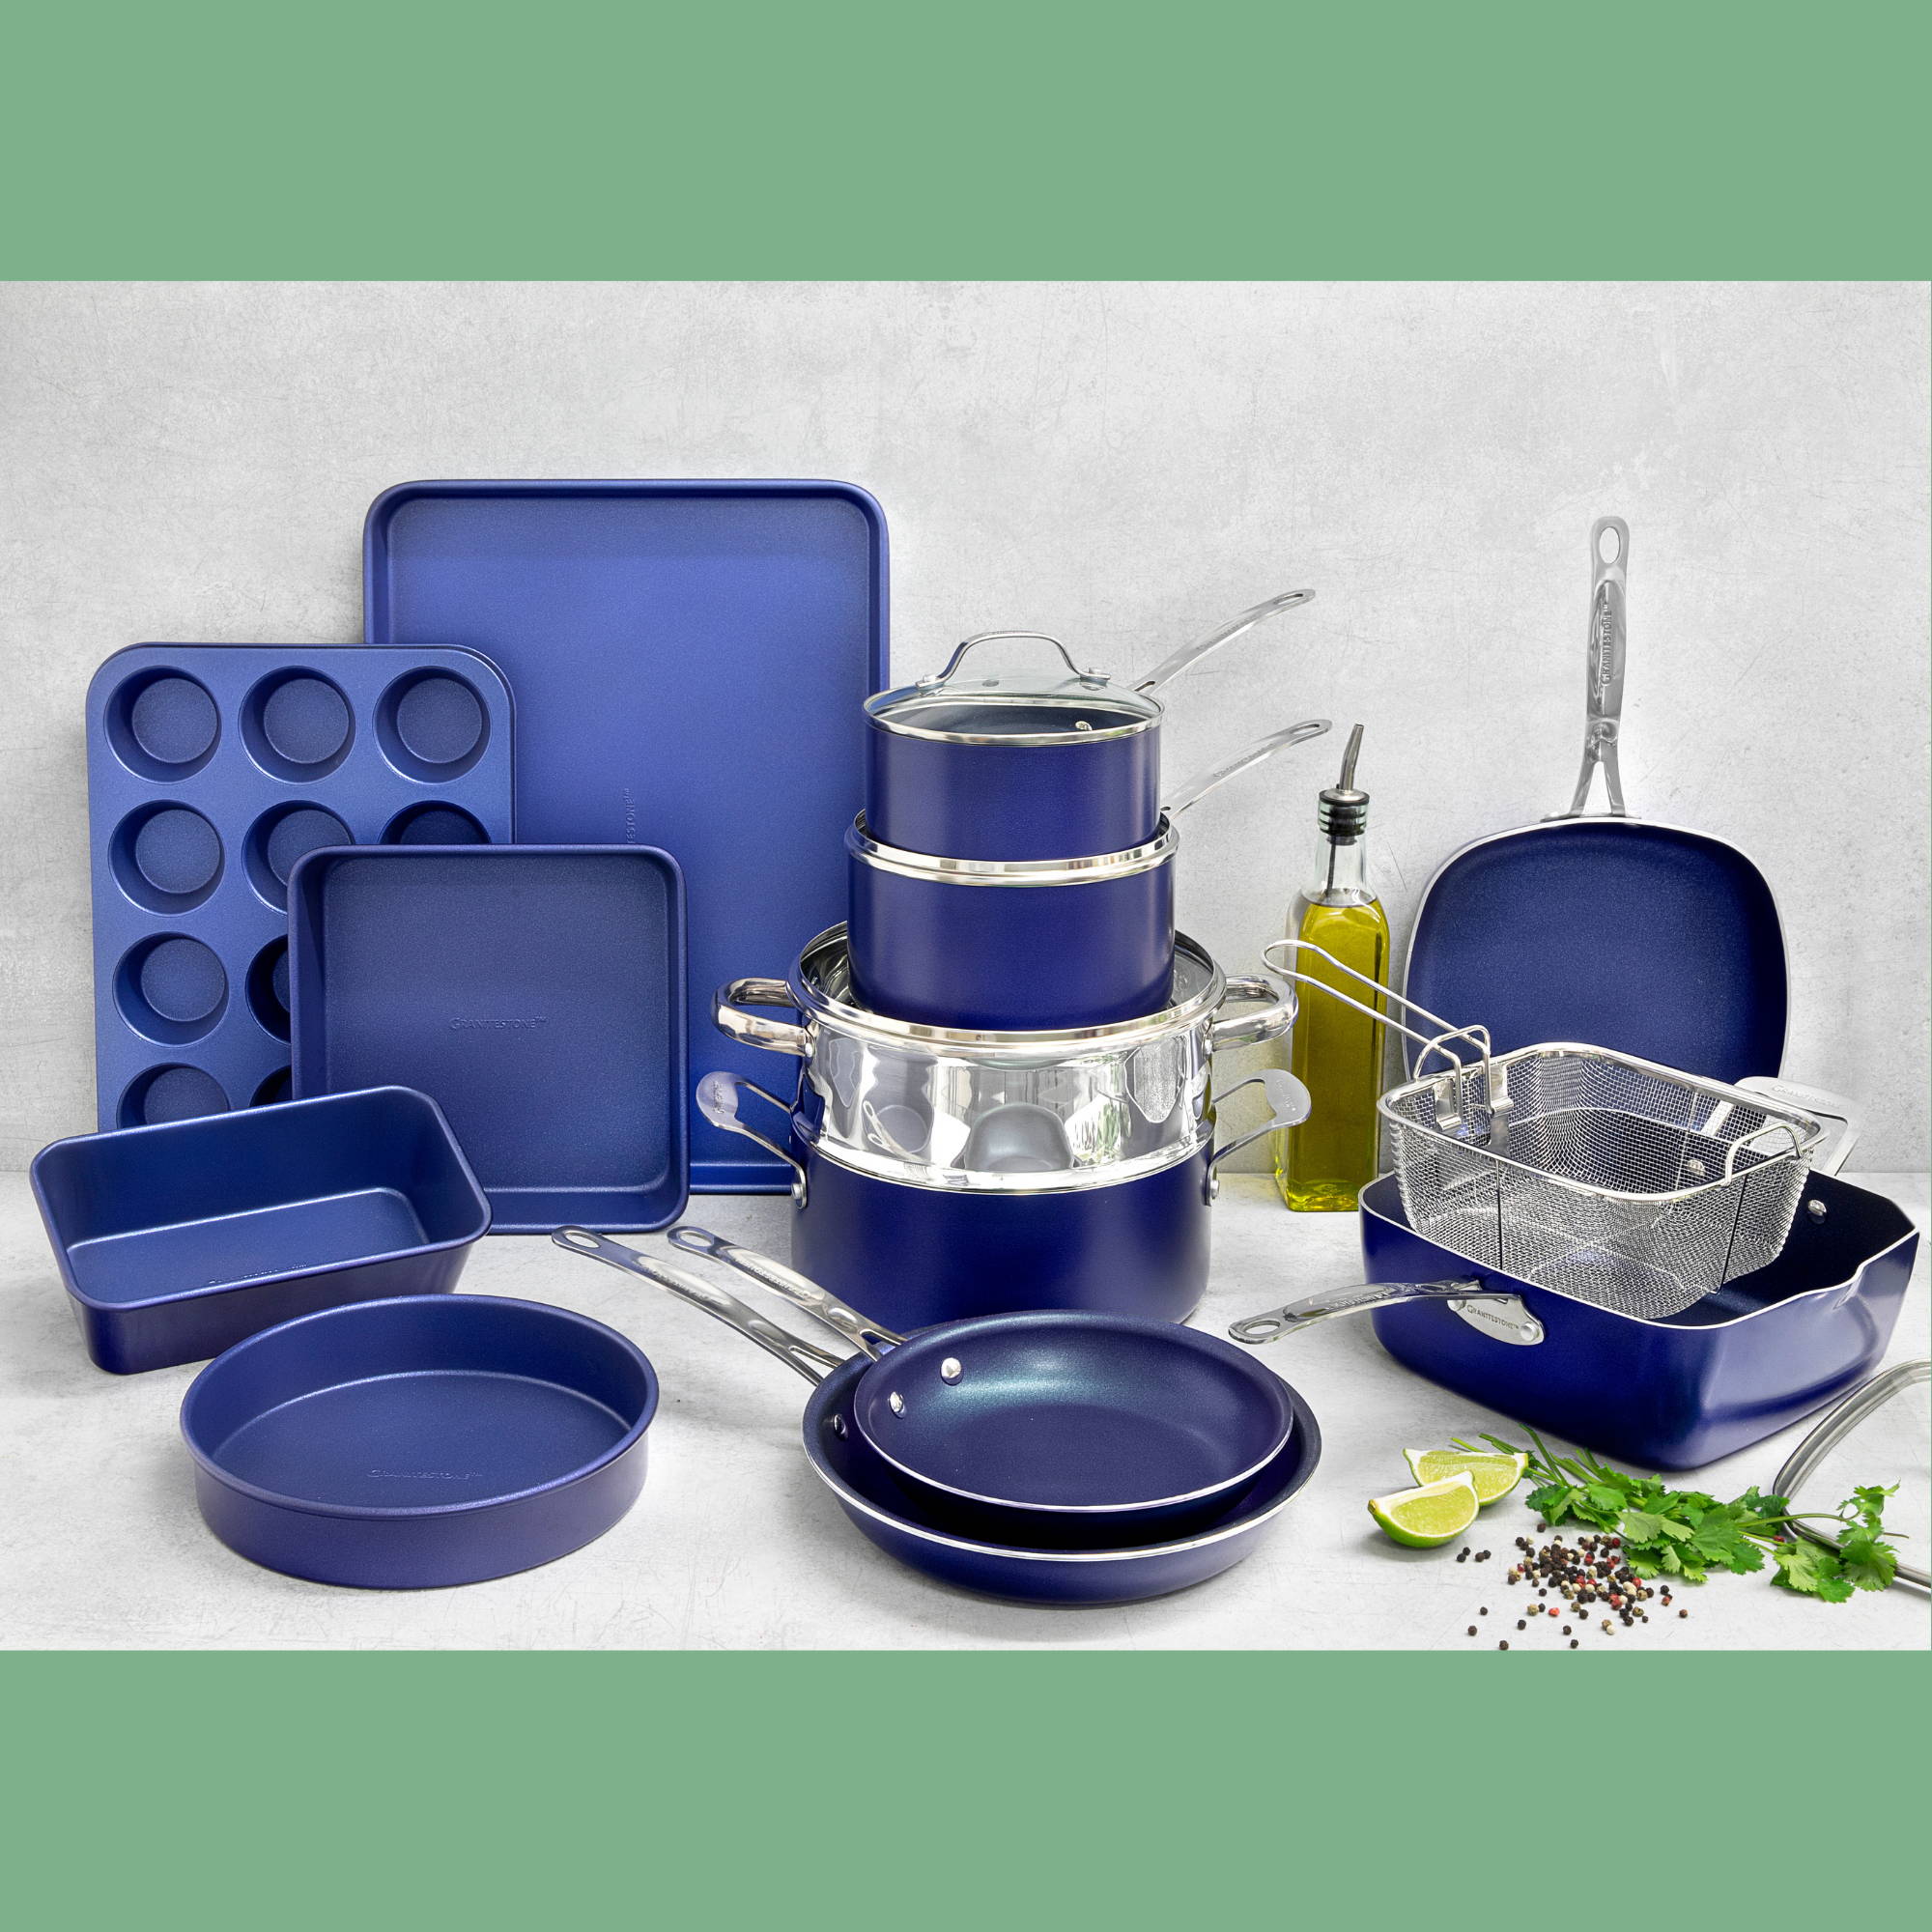 Granite Stone Blue Cookware Review